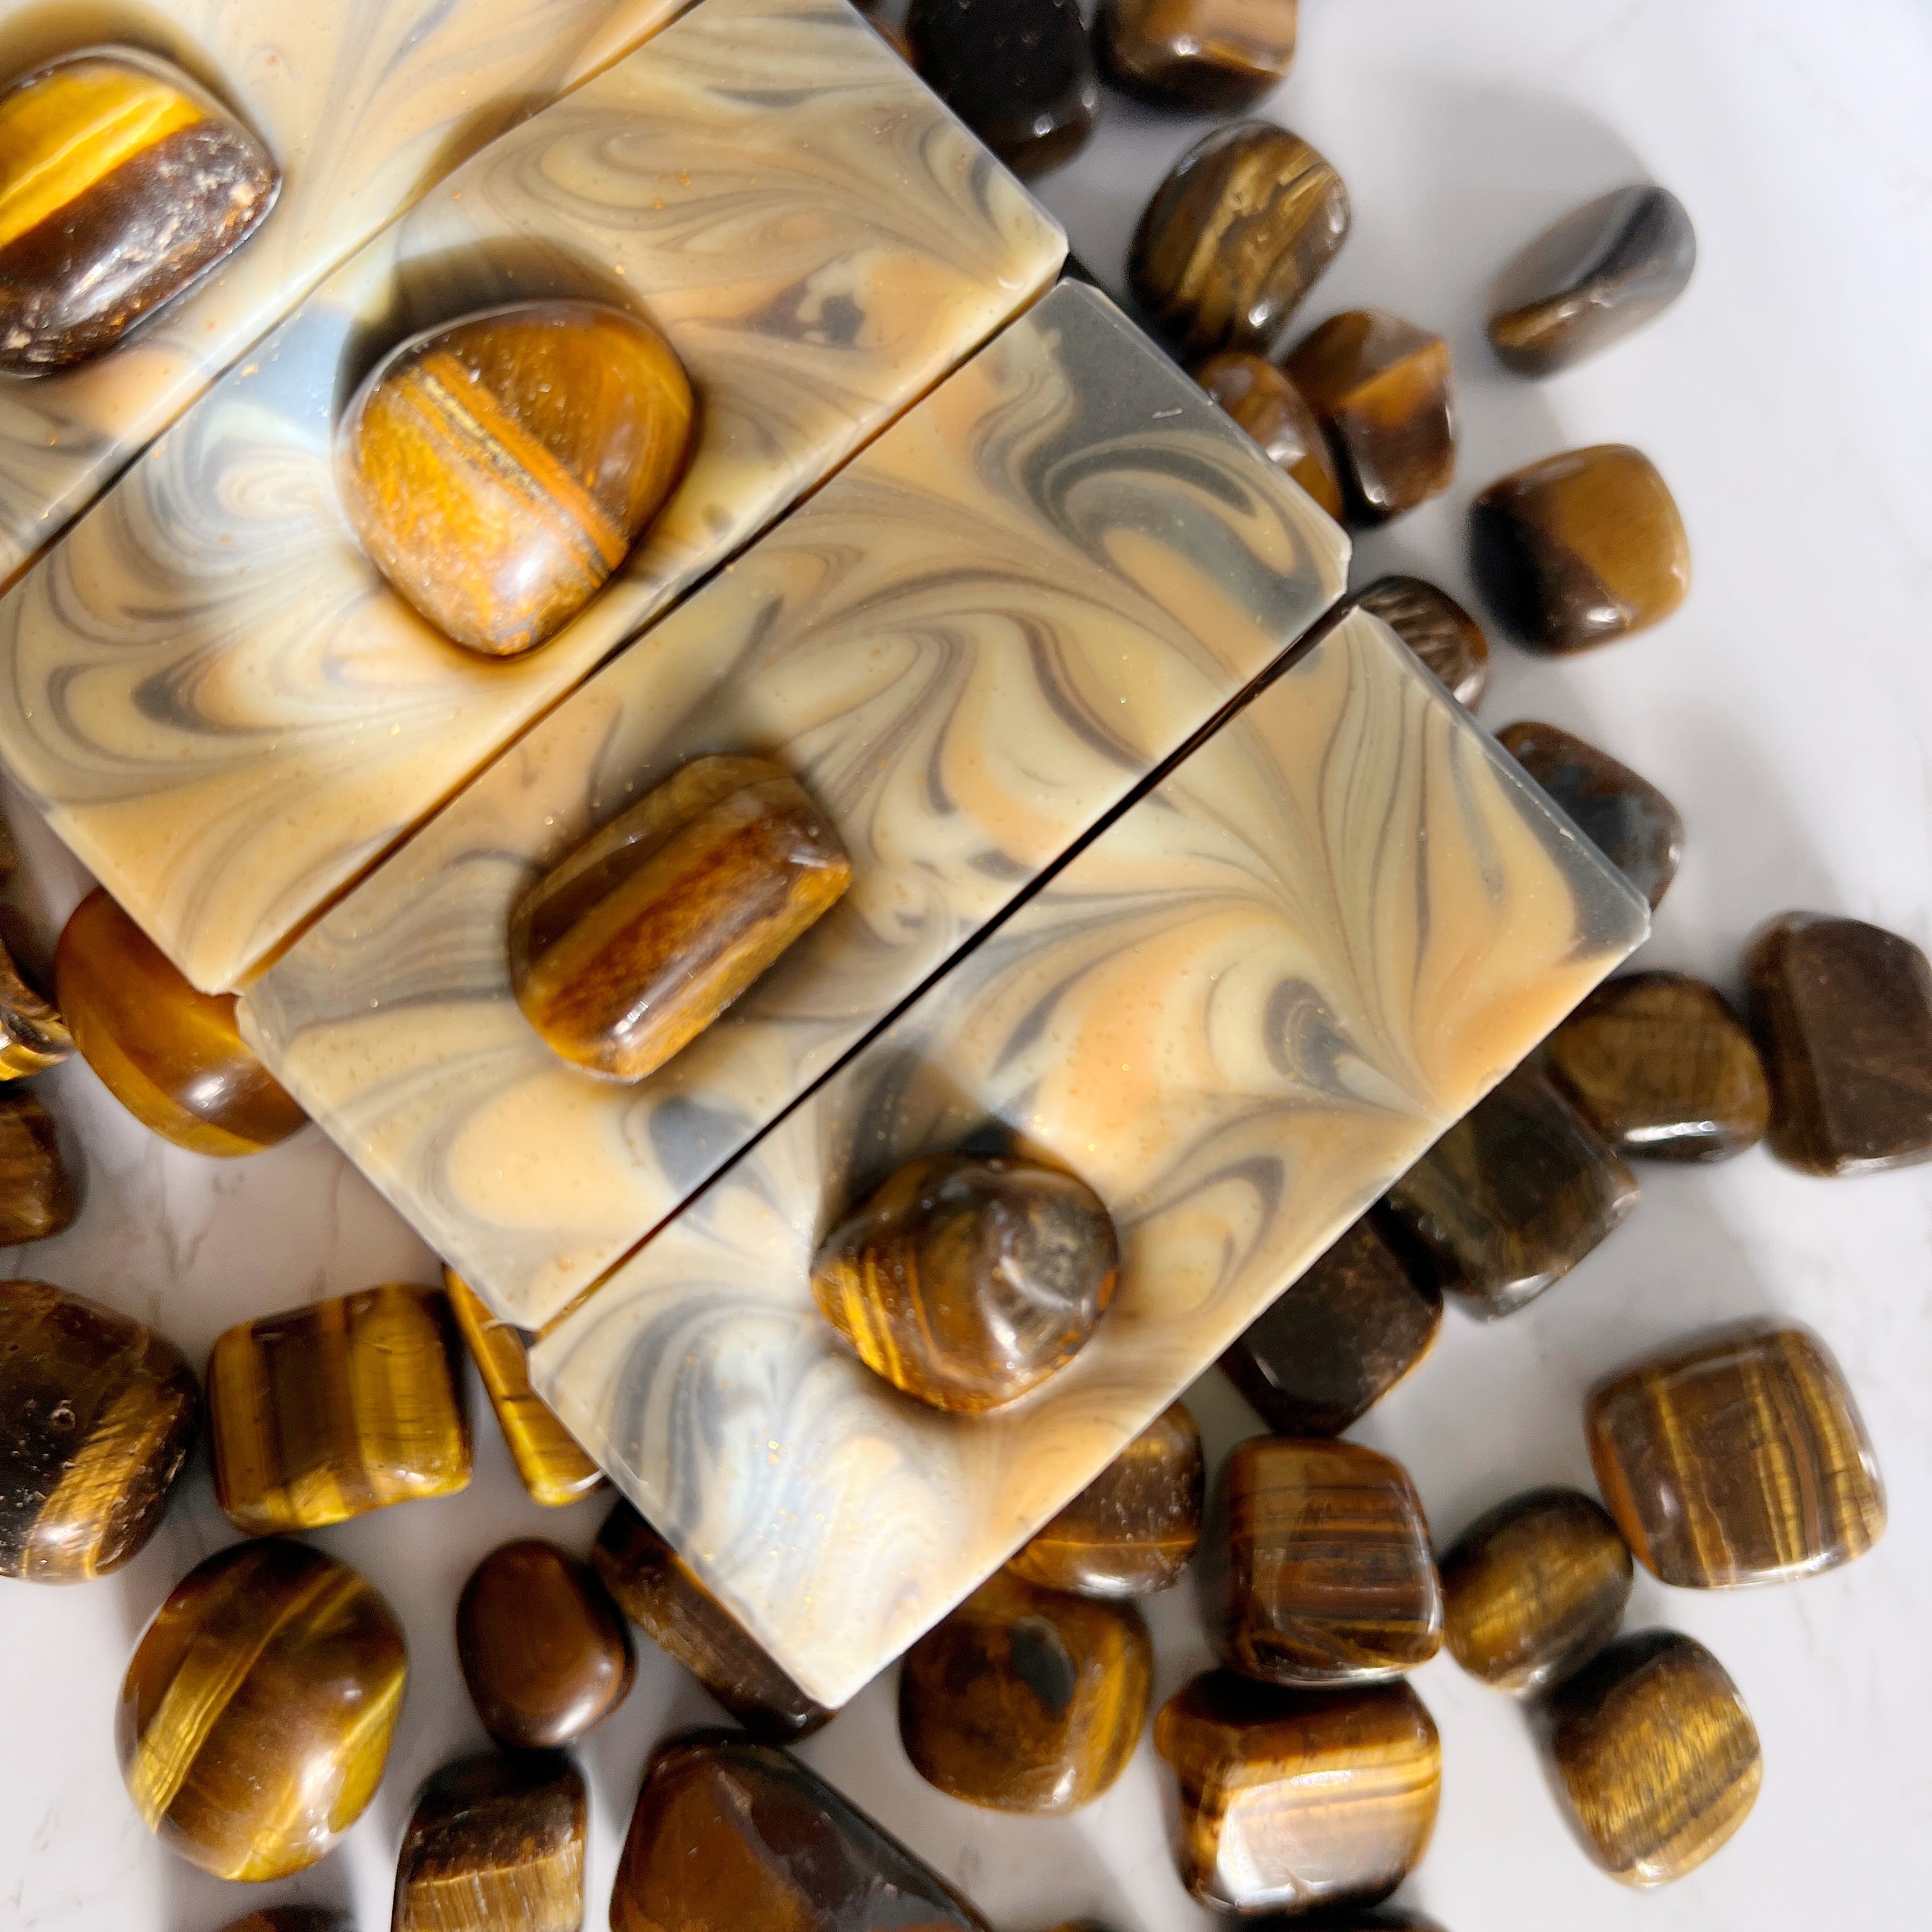 Tiger's eye crystal soap from Lather and Soul, the best selling crystal soaps